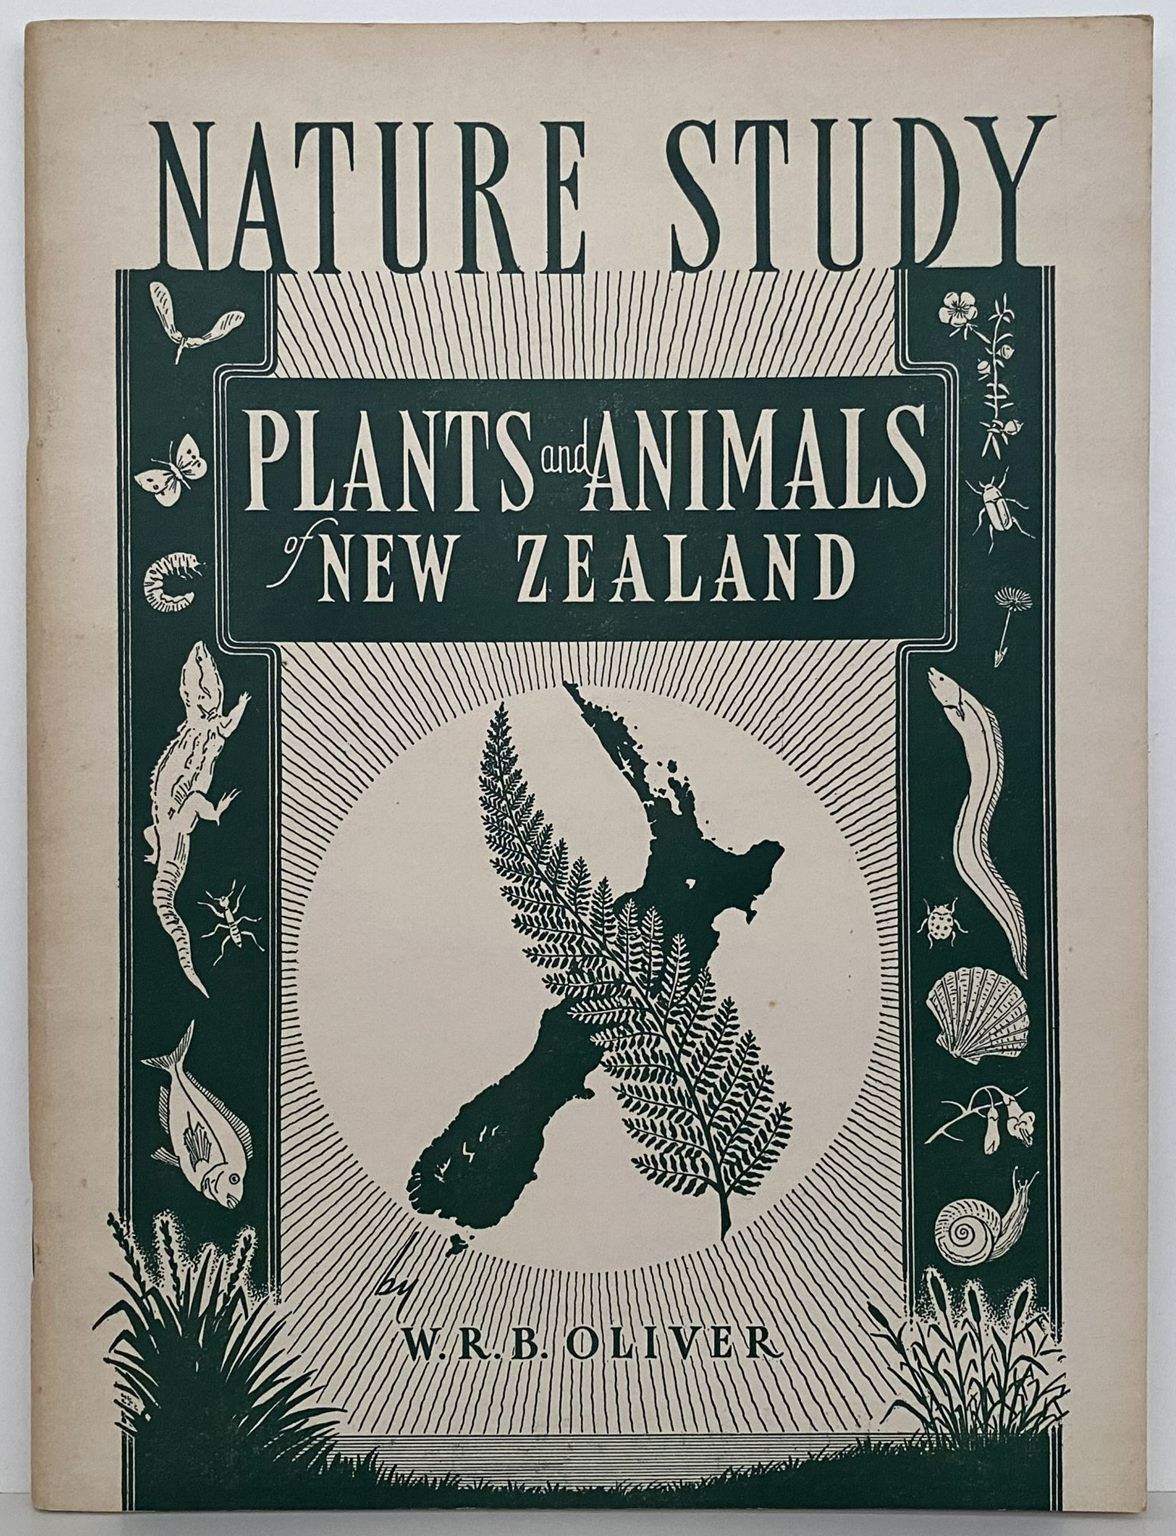 NATURE STUDY: Plants and Animals of New Zealand